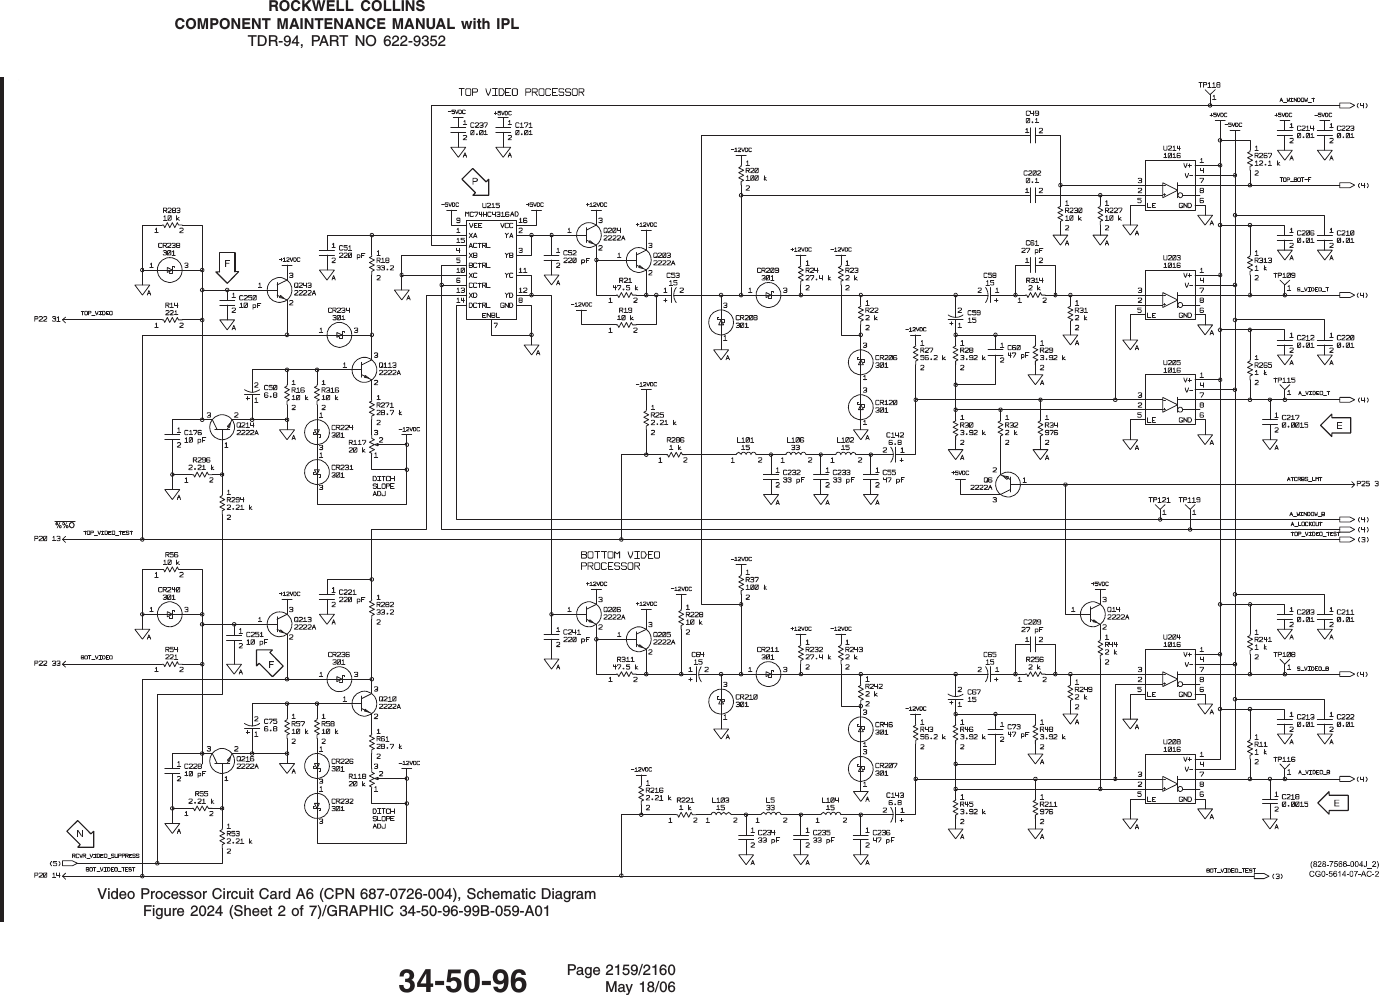 ROCKWELL COLLINSCOMPONENT MAINTENANCE MANUAL with IPLTDR-94, PART NO 622-9352Video Processor Circuit Card A6 (CPN 687-0726-004), Schematic DiagramFigure 2024 (Sheet 2 of 7)/GRAPHIC 34-50-96-99B-059-A0134-50-96 Page 2159/2160May 18/06